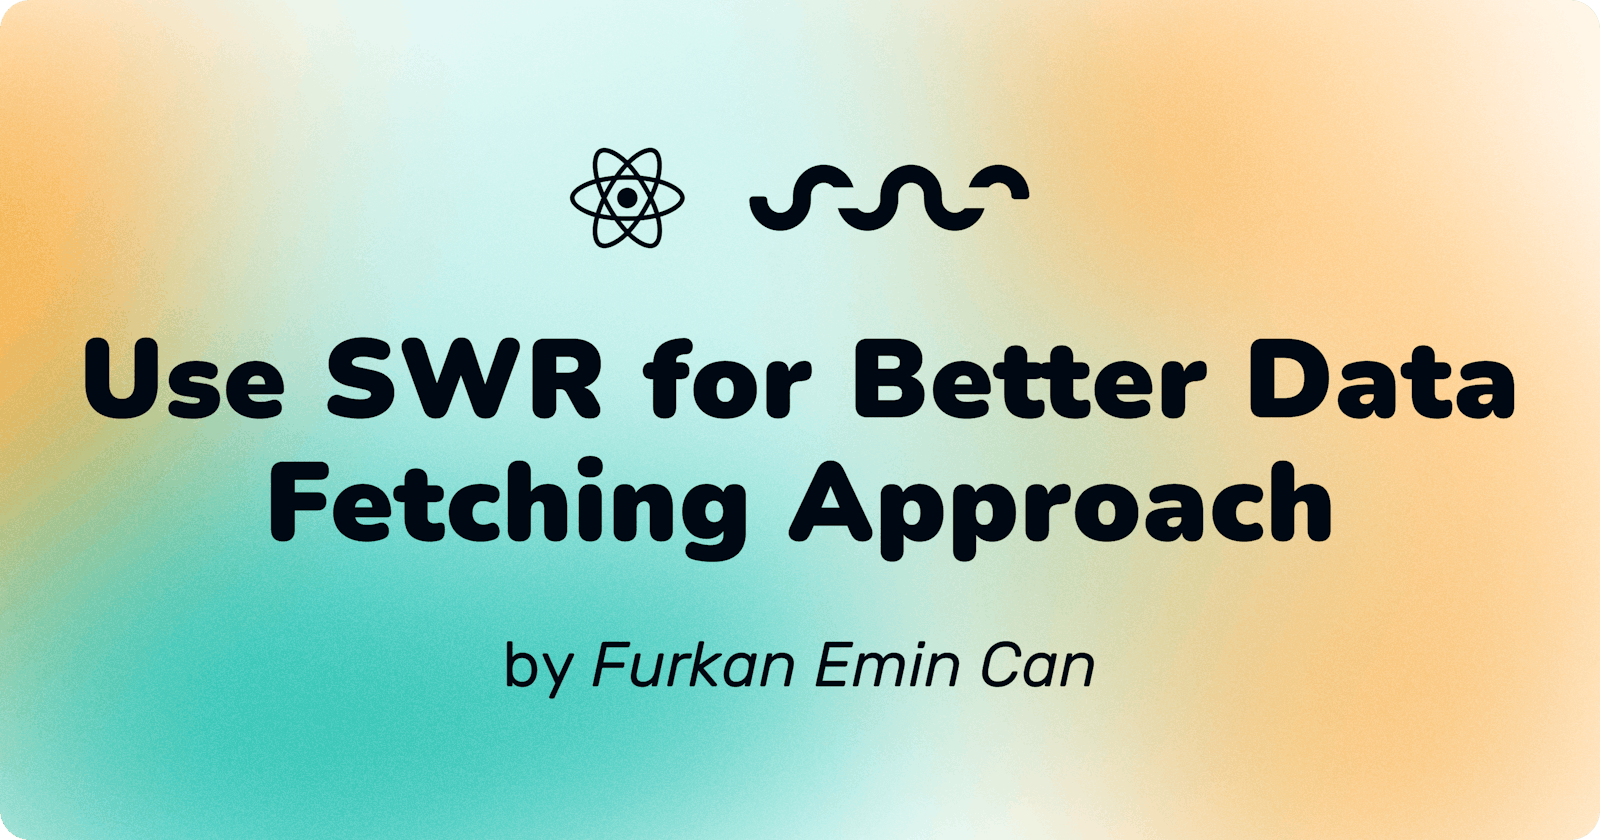 How to Use SWR for Better Data Fetching Approach